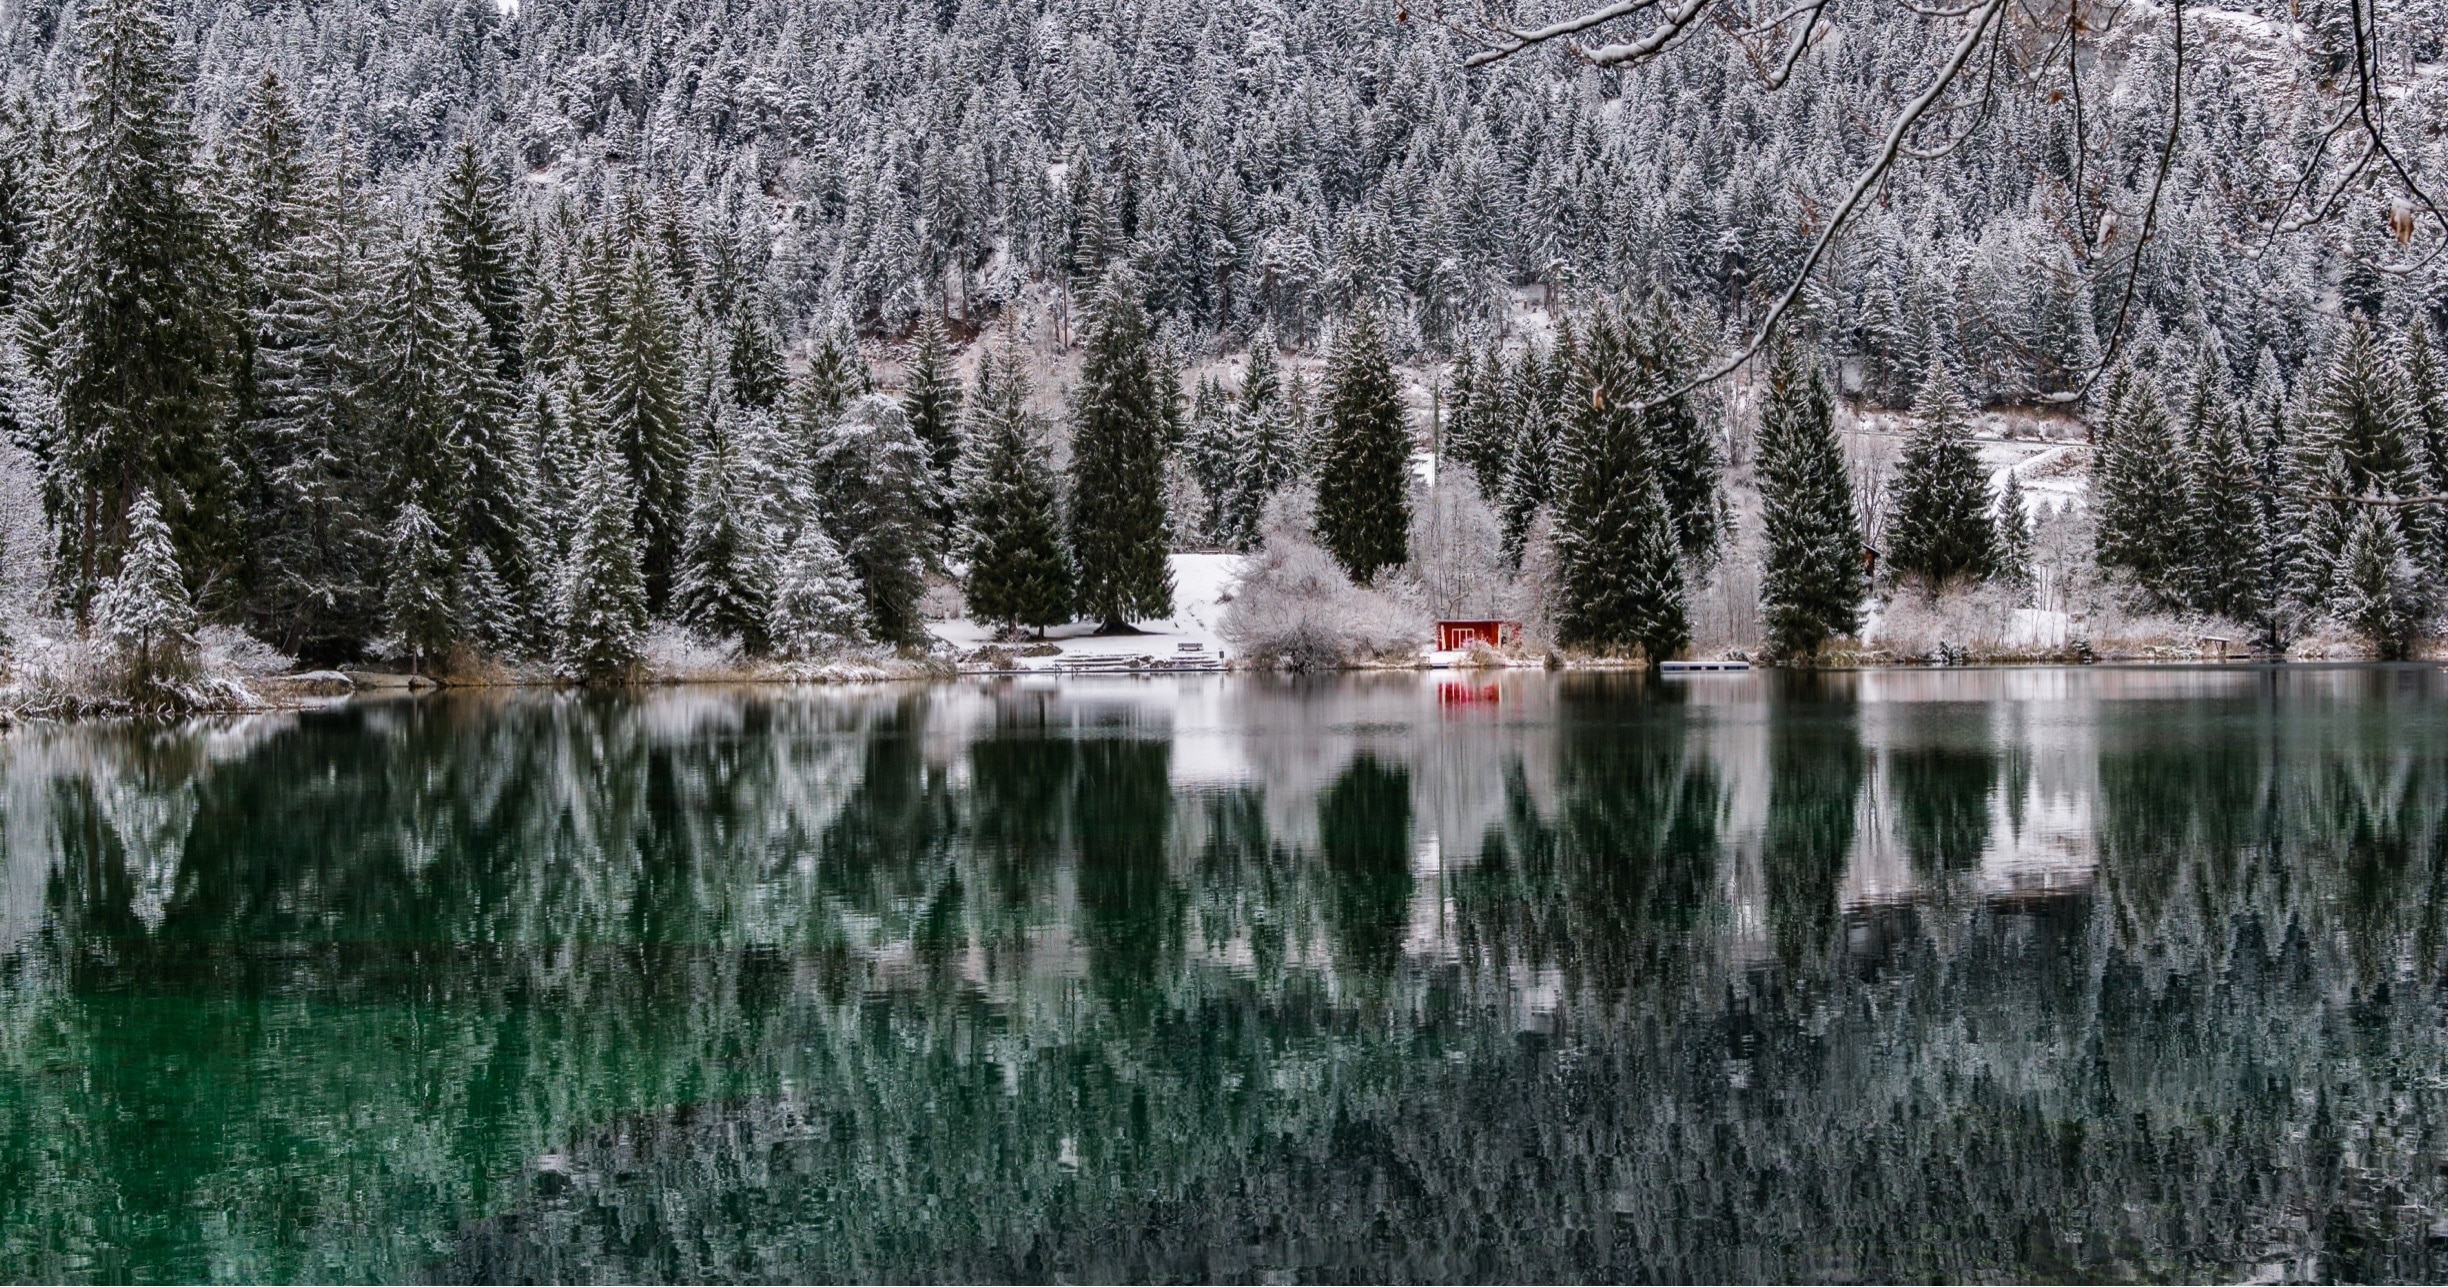 Just a tiny red house near by a lake. 

#red